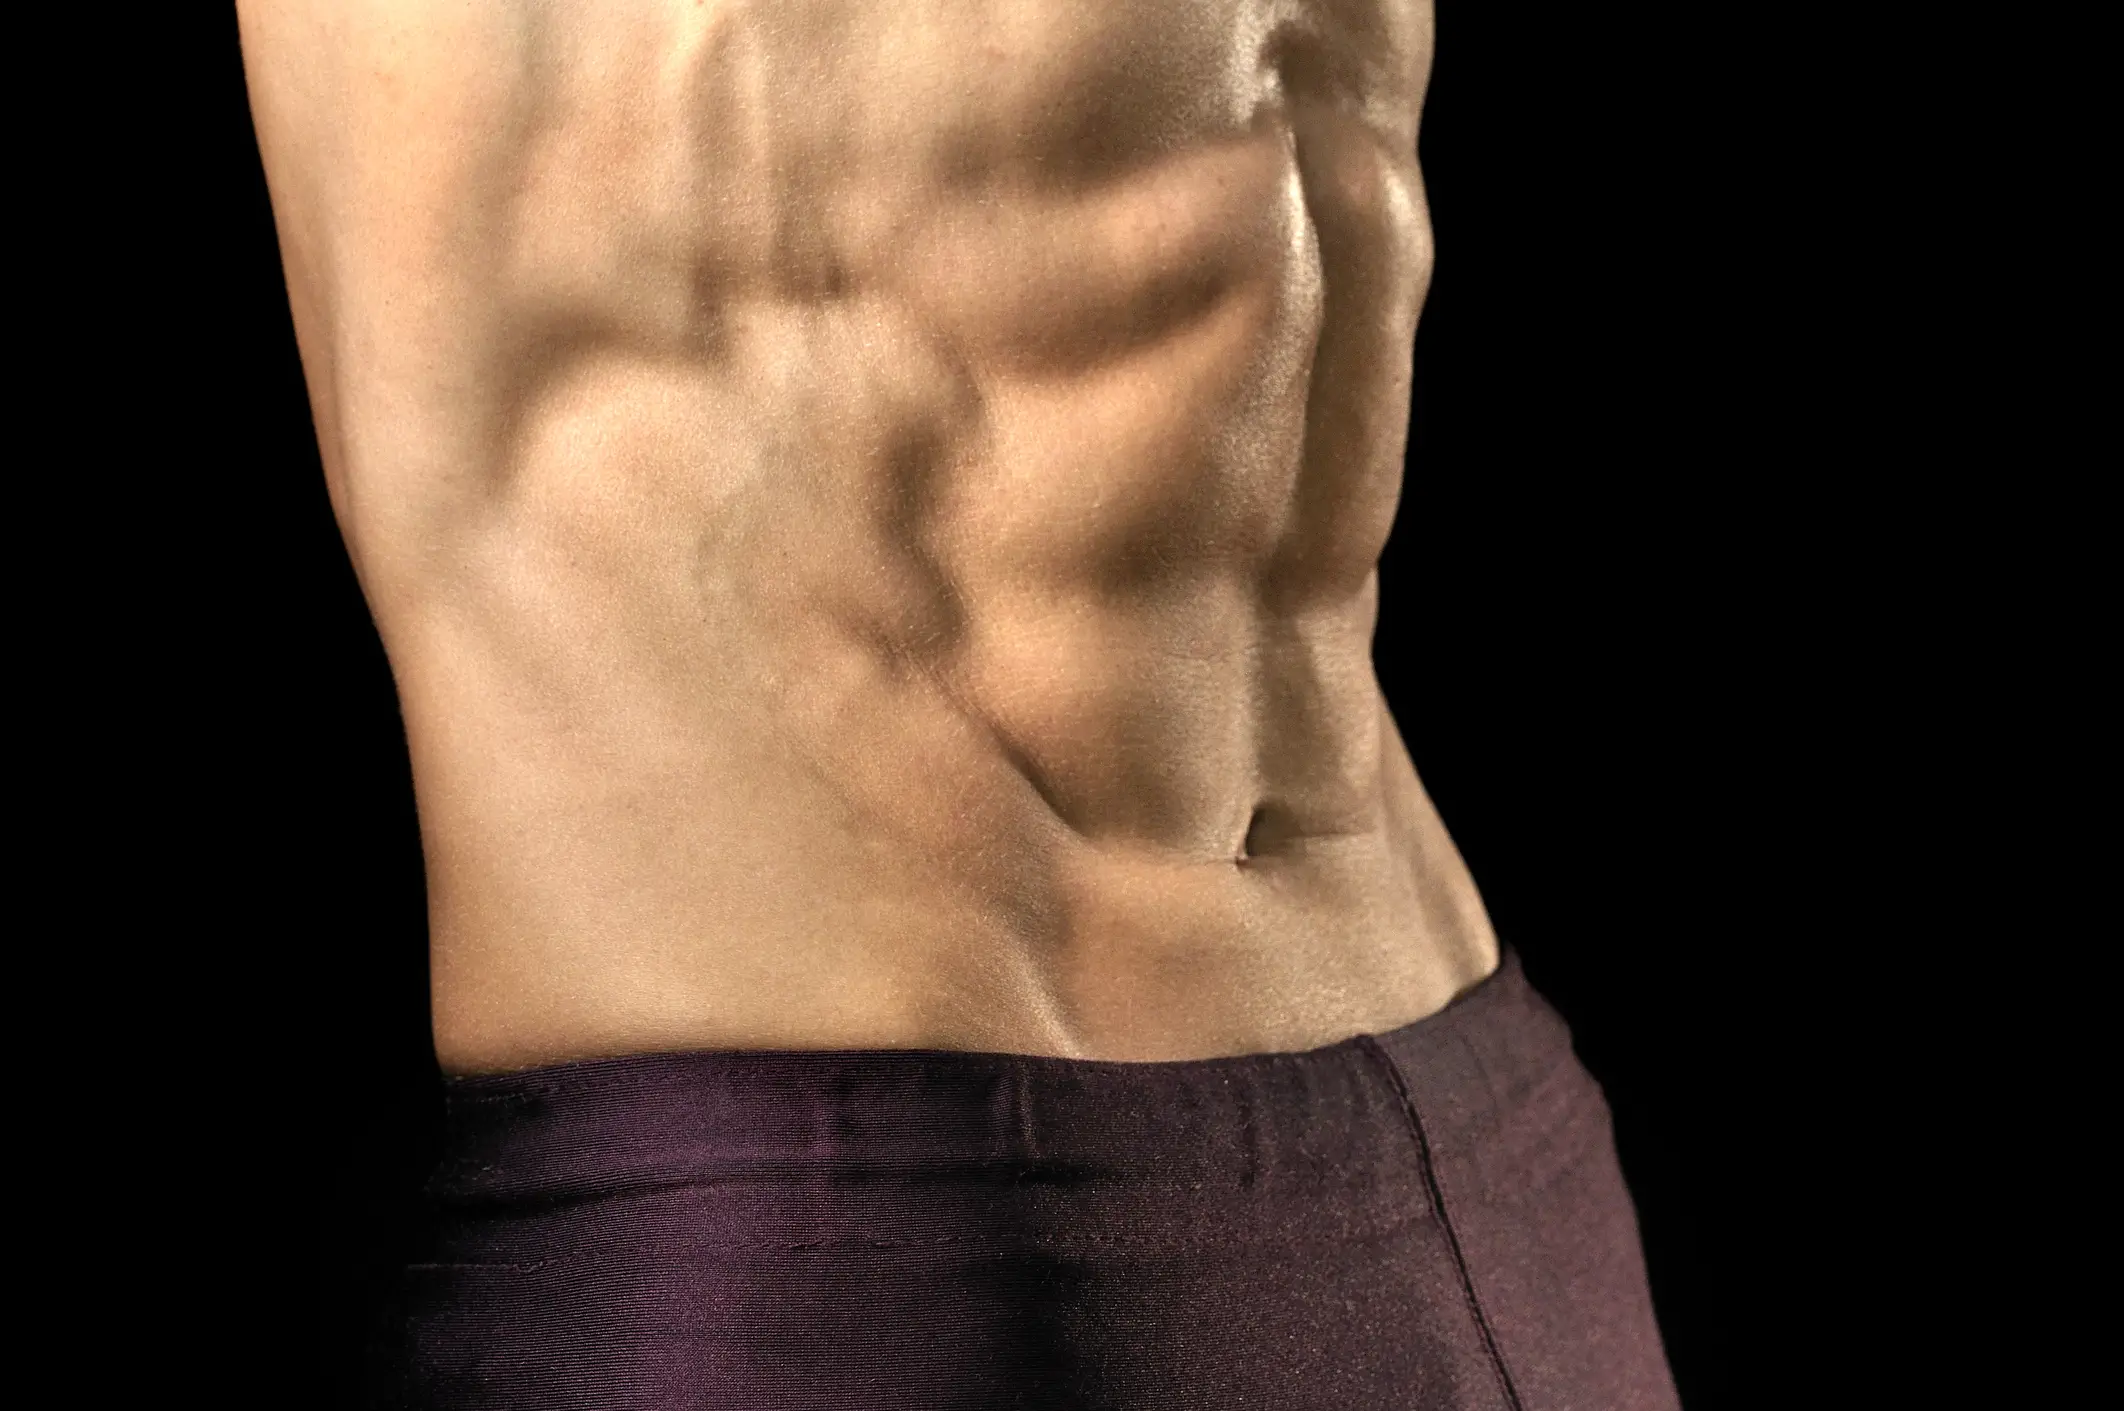 Defined abs are also known as hard abs